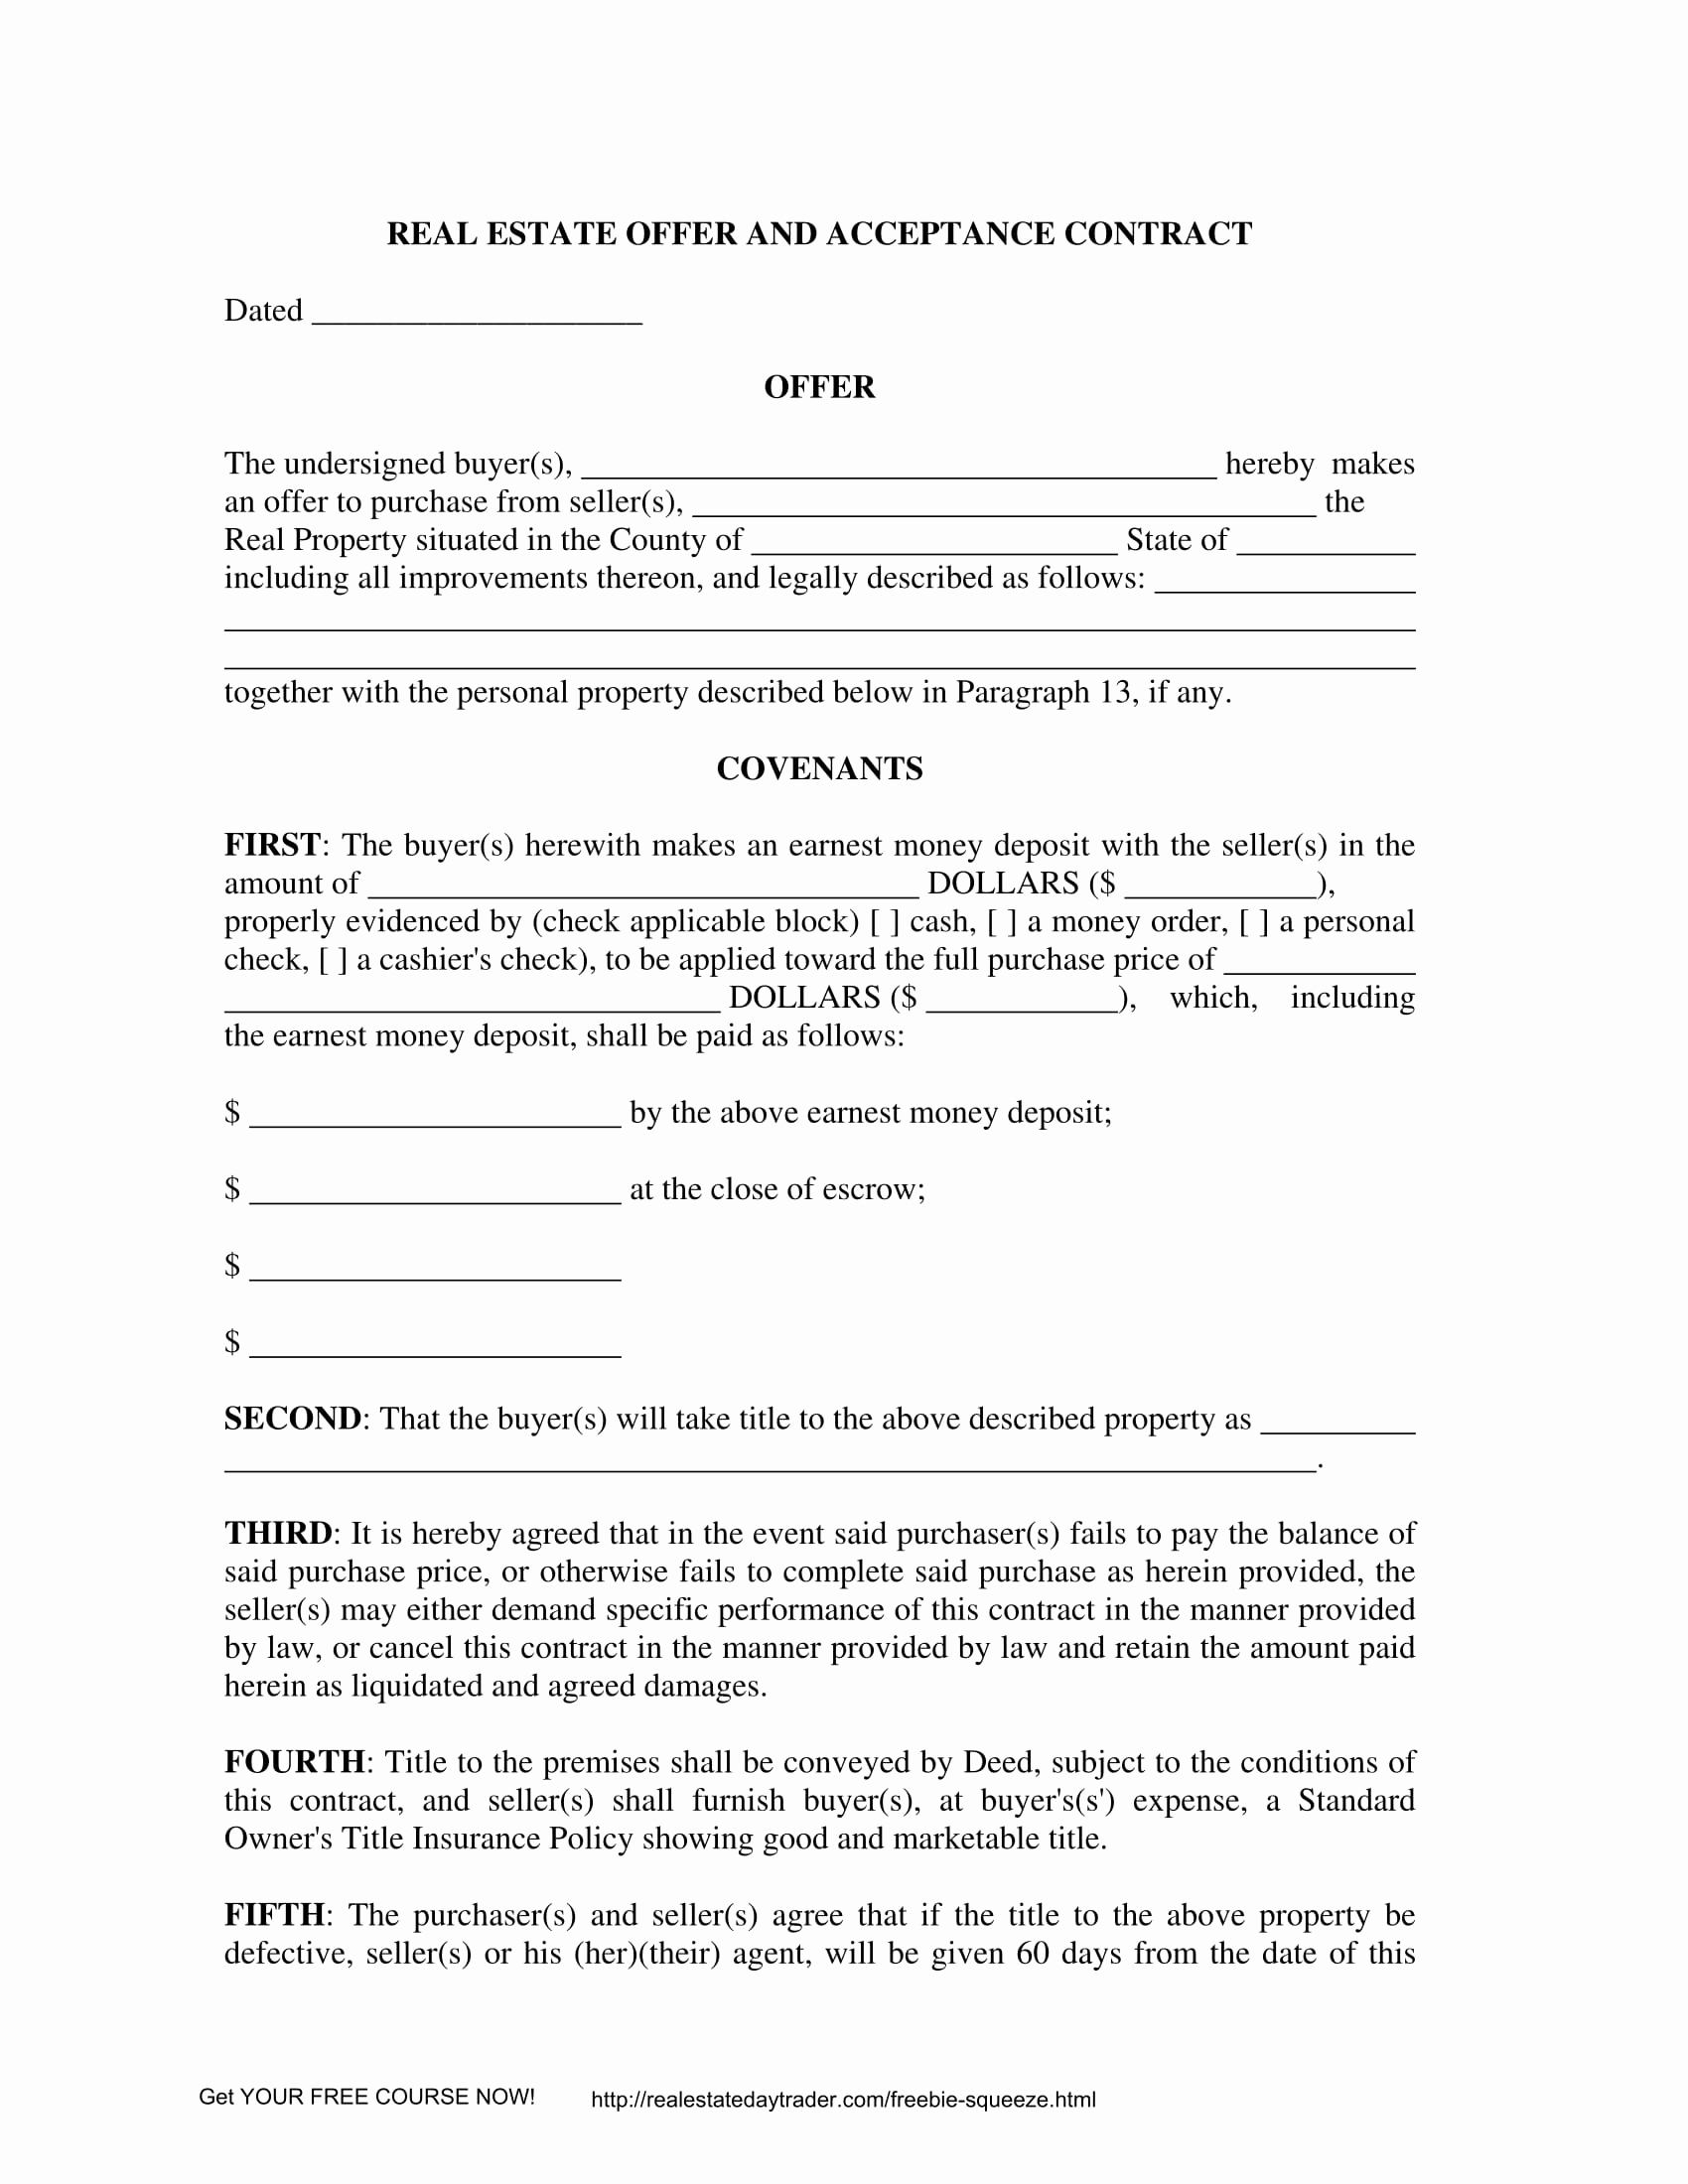 Real Estate Offer form Awesome 15 Real Estate Contract and Agreement forms